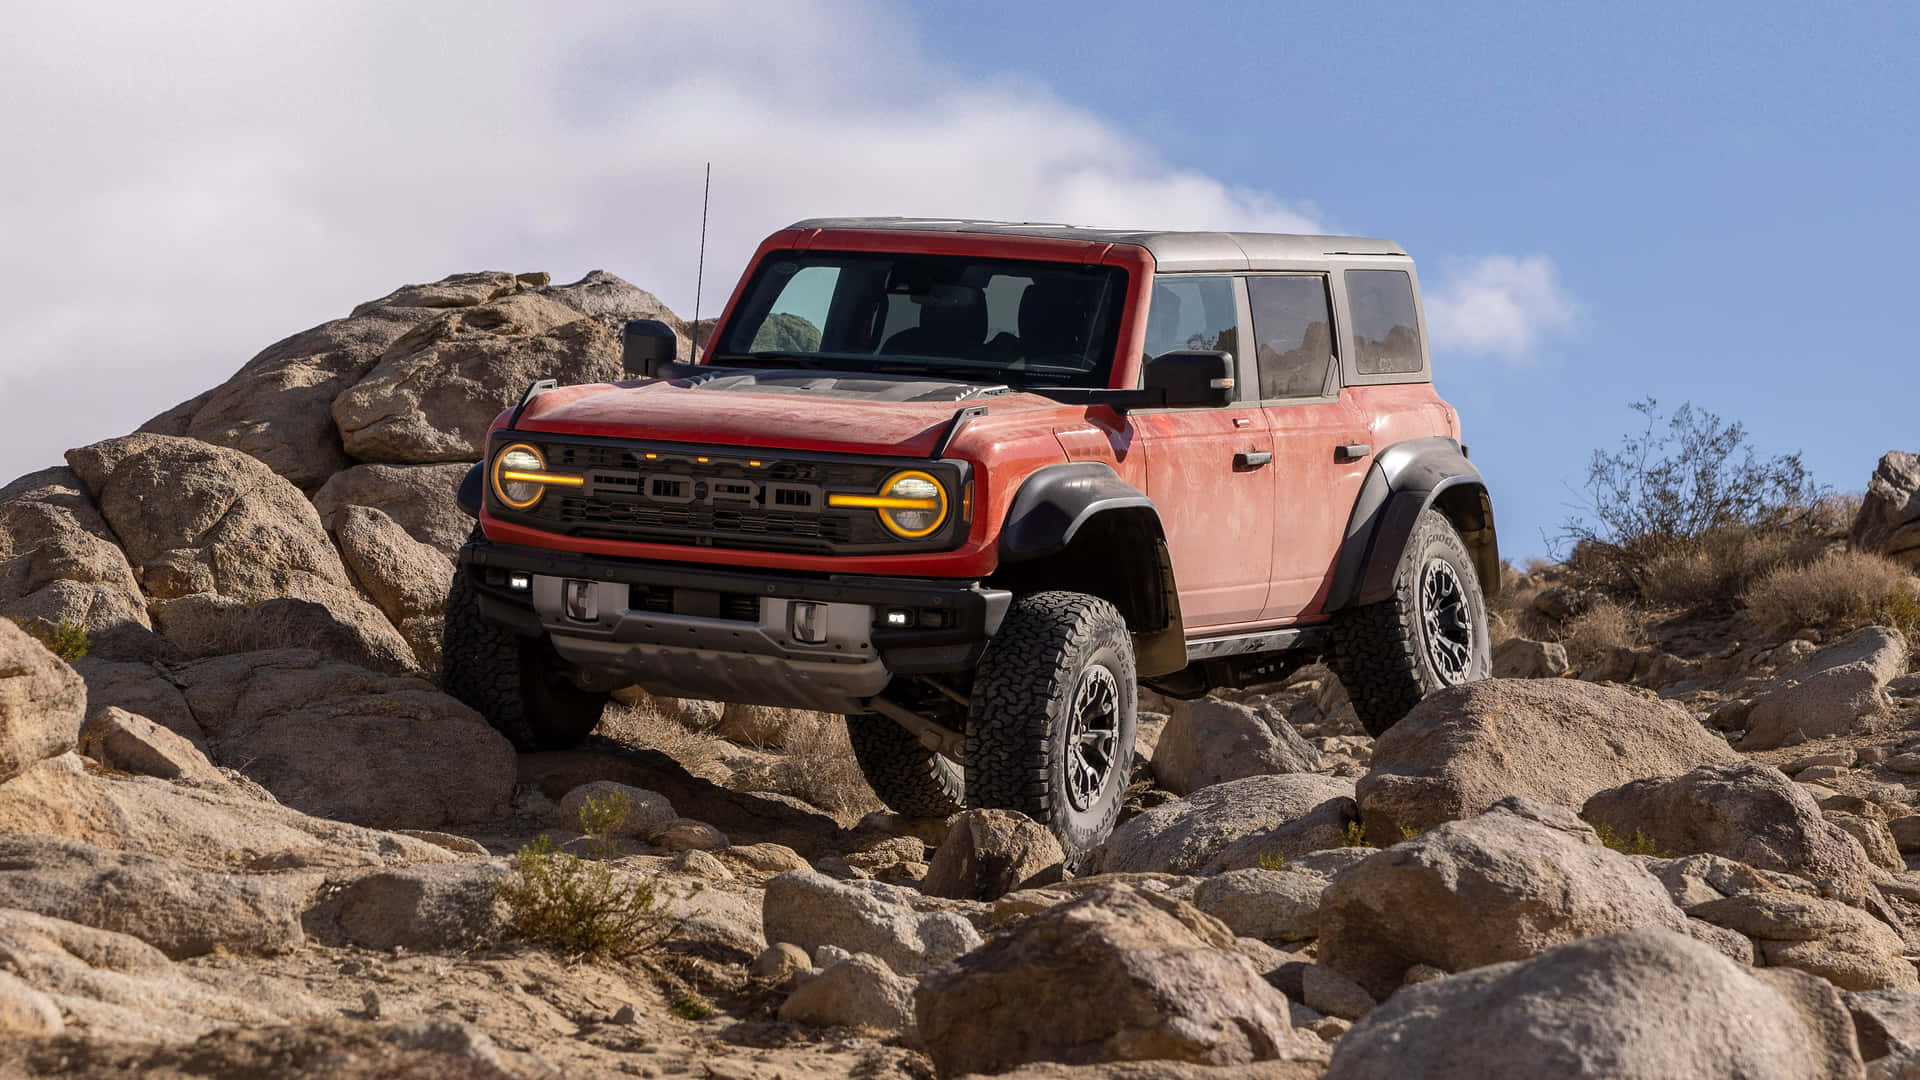 The 2020 Ford Bronco Is Driving On A Rocky Trail